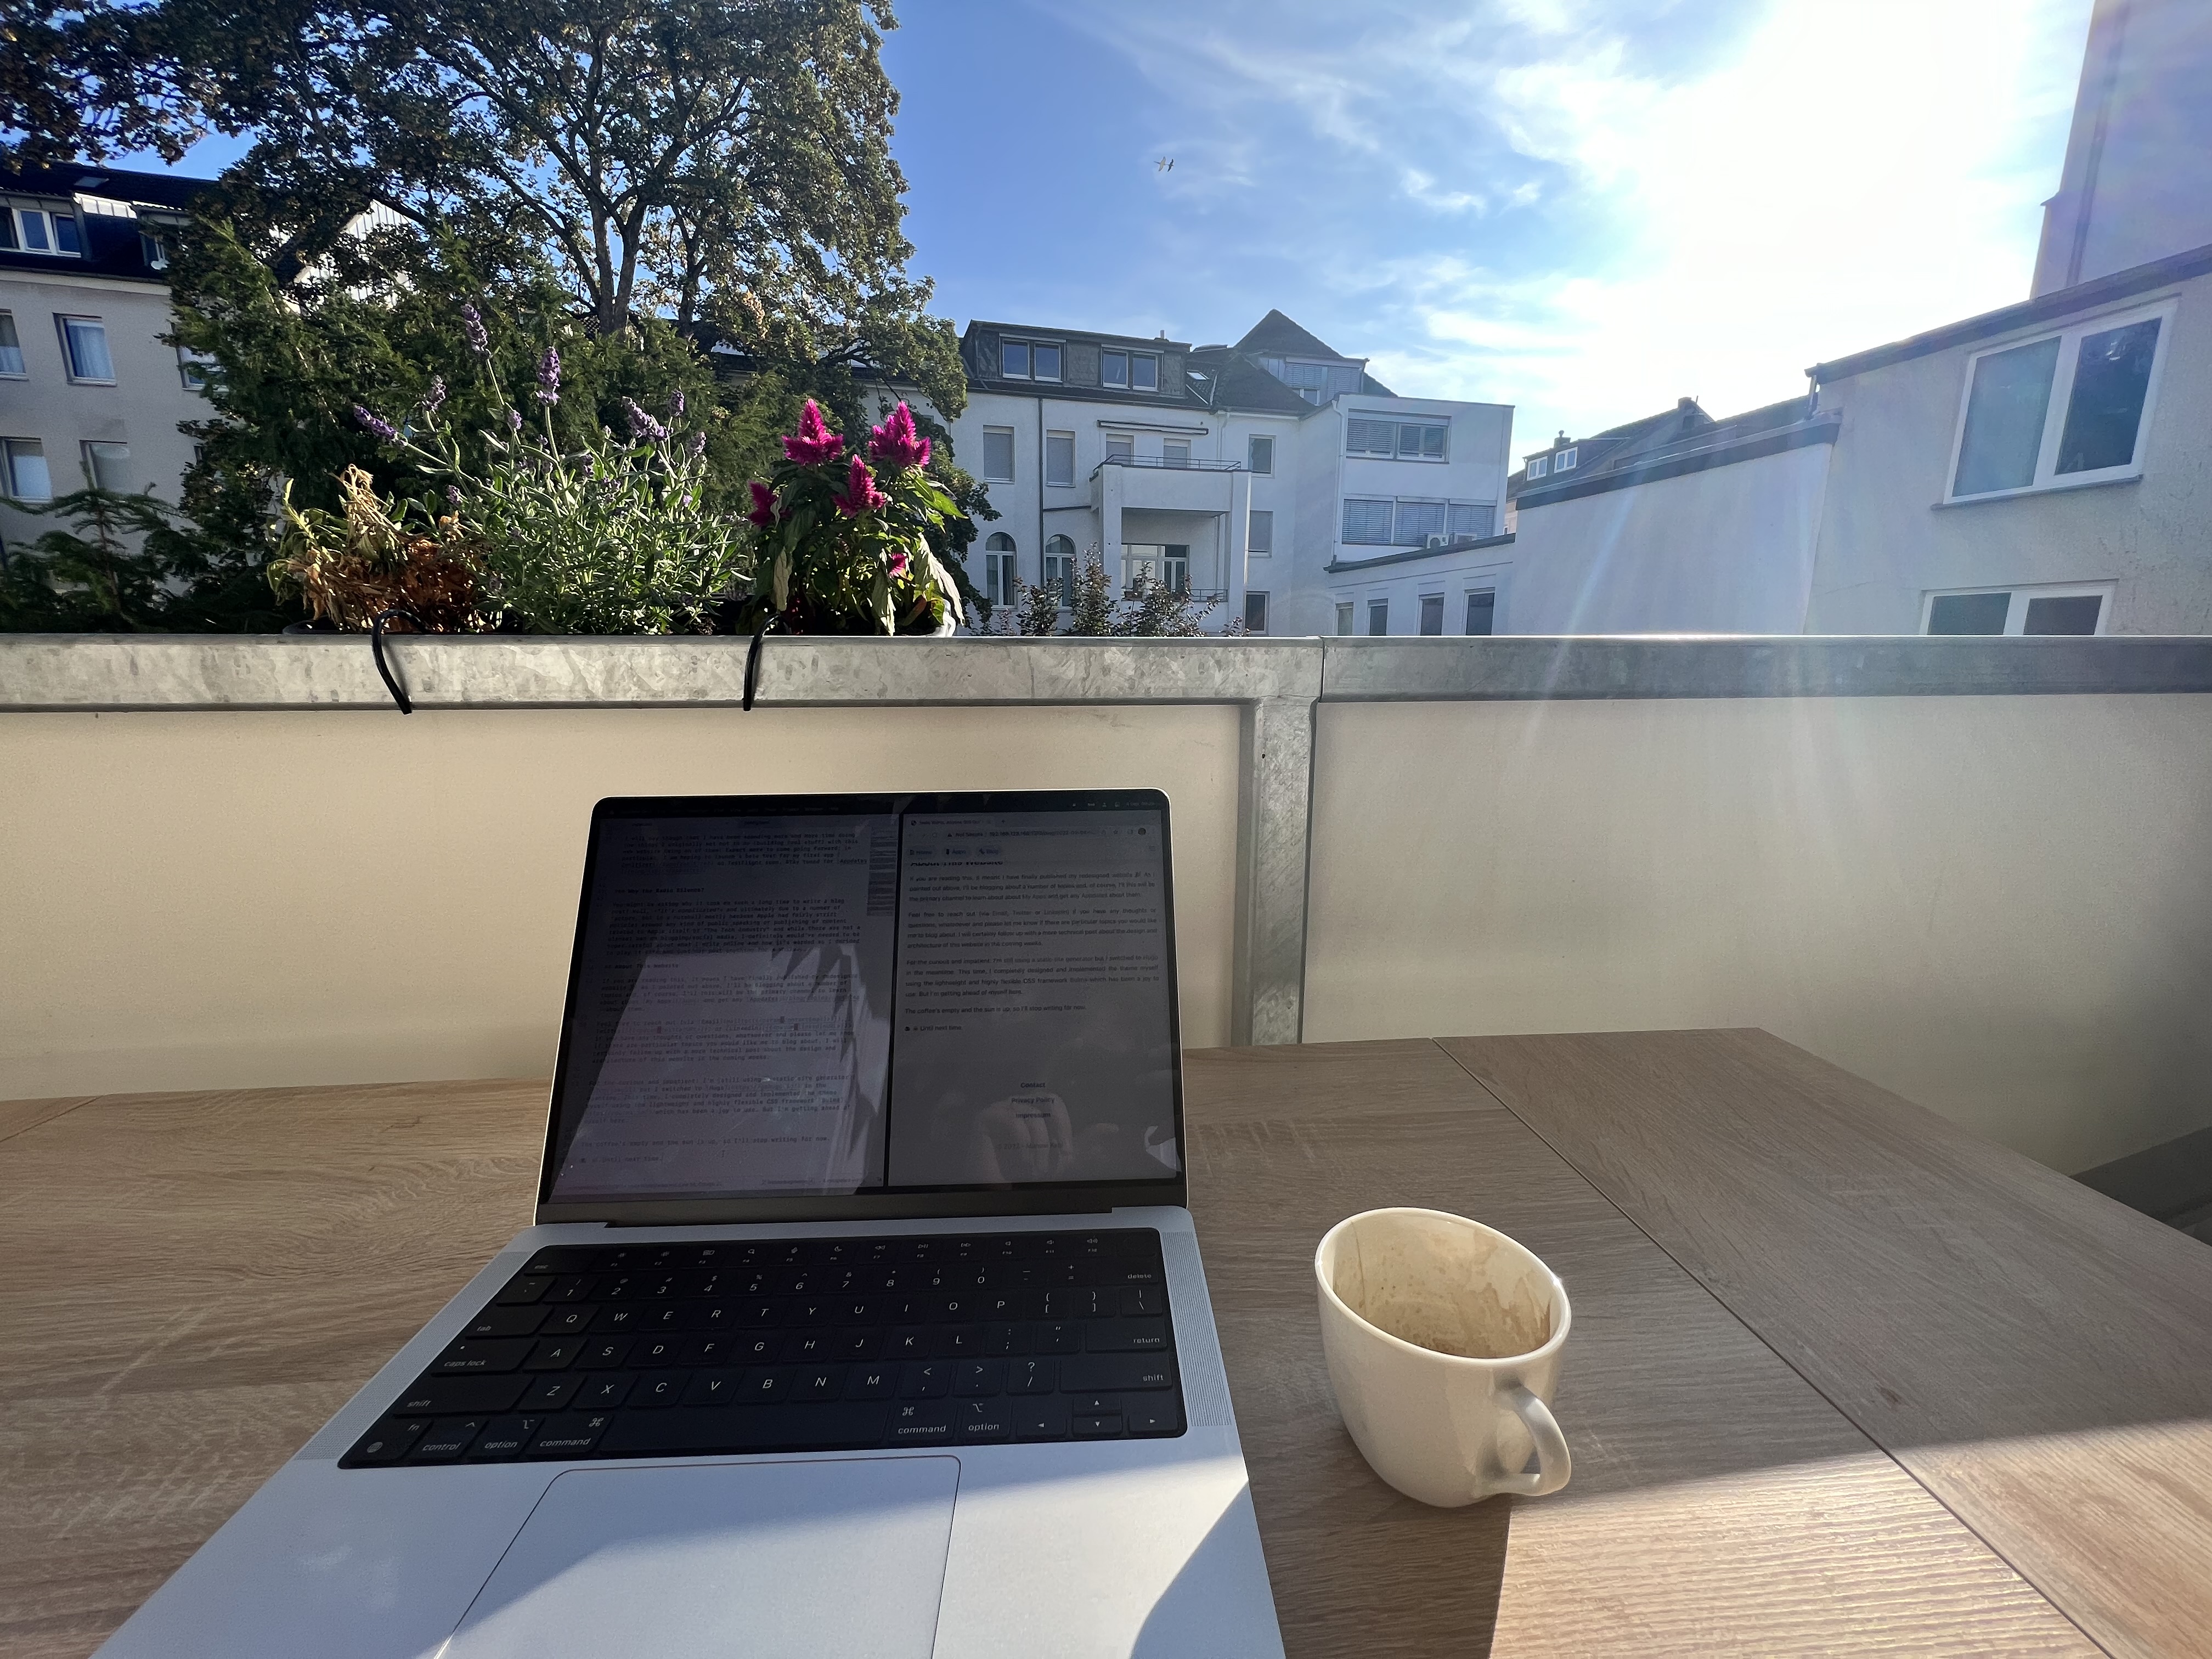 &ldquo;A view of our balcony in our Bonn apartment where I&rsquo;m watching the sunrise and writing my first blog post for the new website. There&rsquo;s a cup of freshly brewed espresso next to my Laptop.&rdquo;